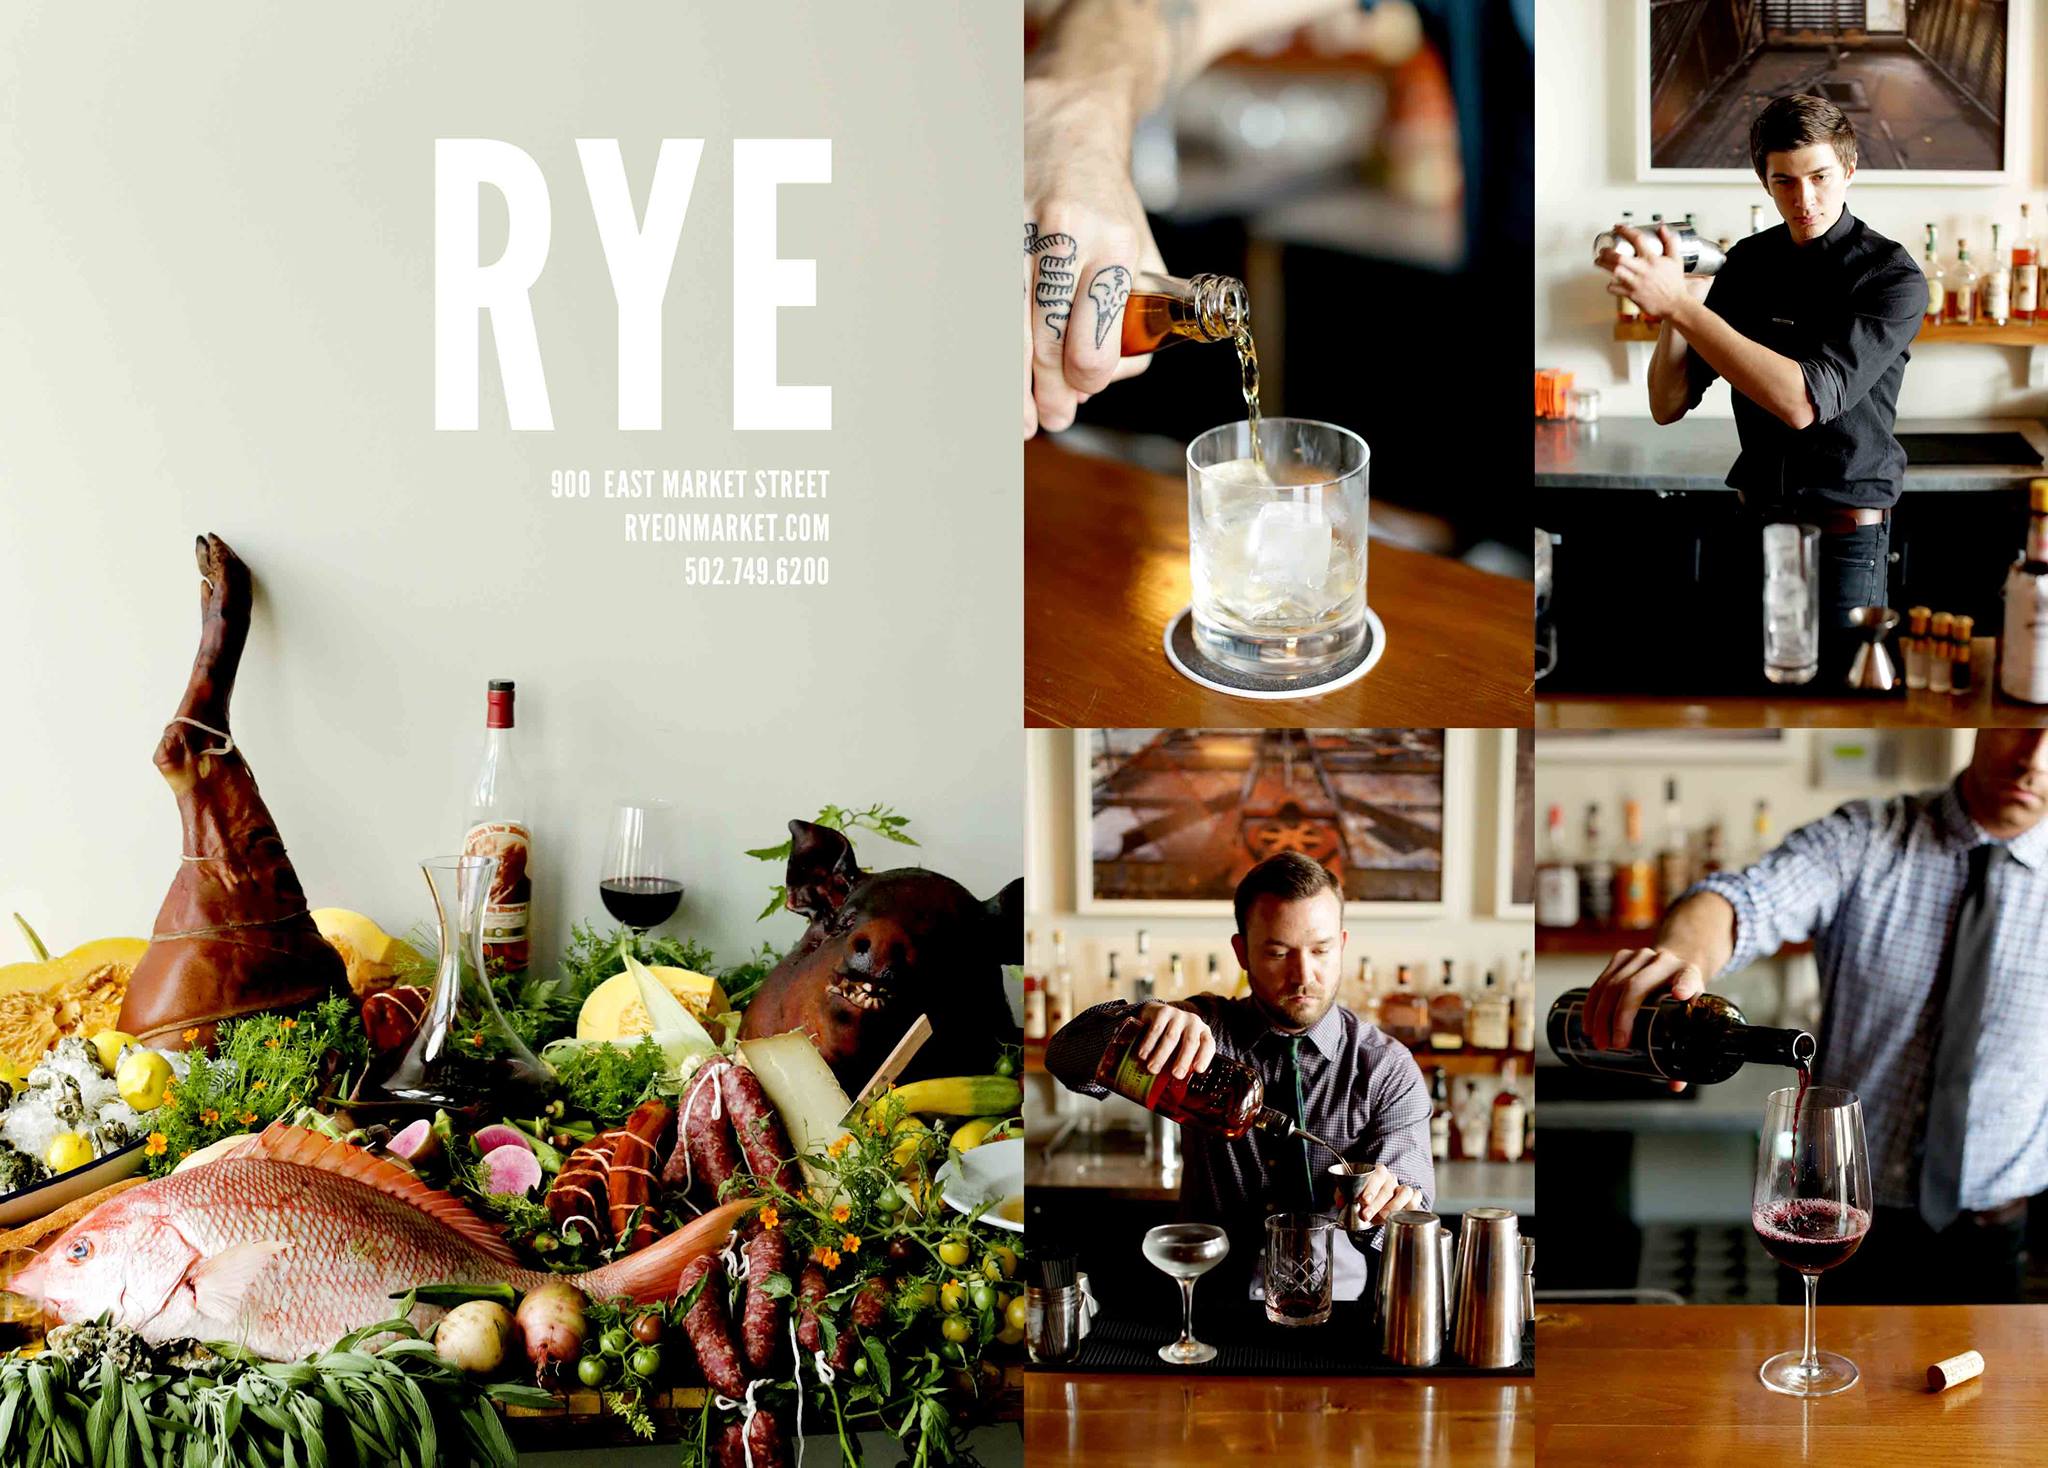 The Kentucky Gent, a men's Southern fashion and life style blogger, introduces Rye as part of Idea Festival's Taste of Innovation line up. 